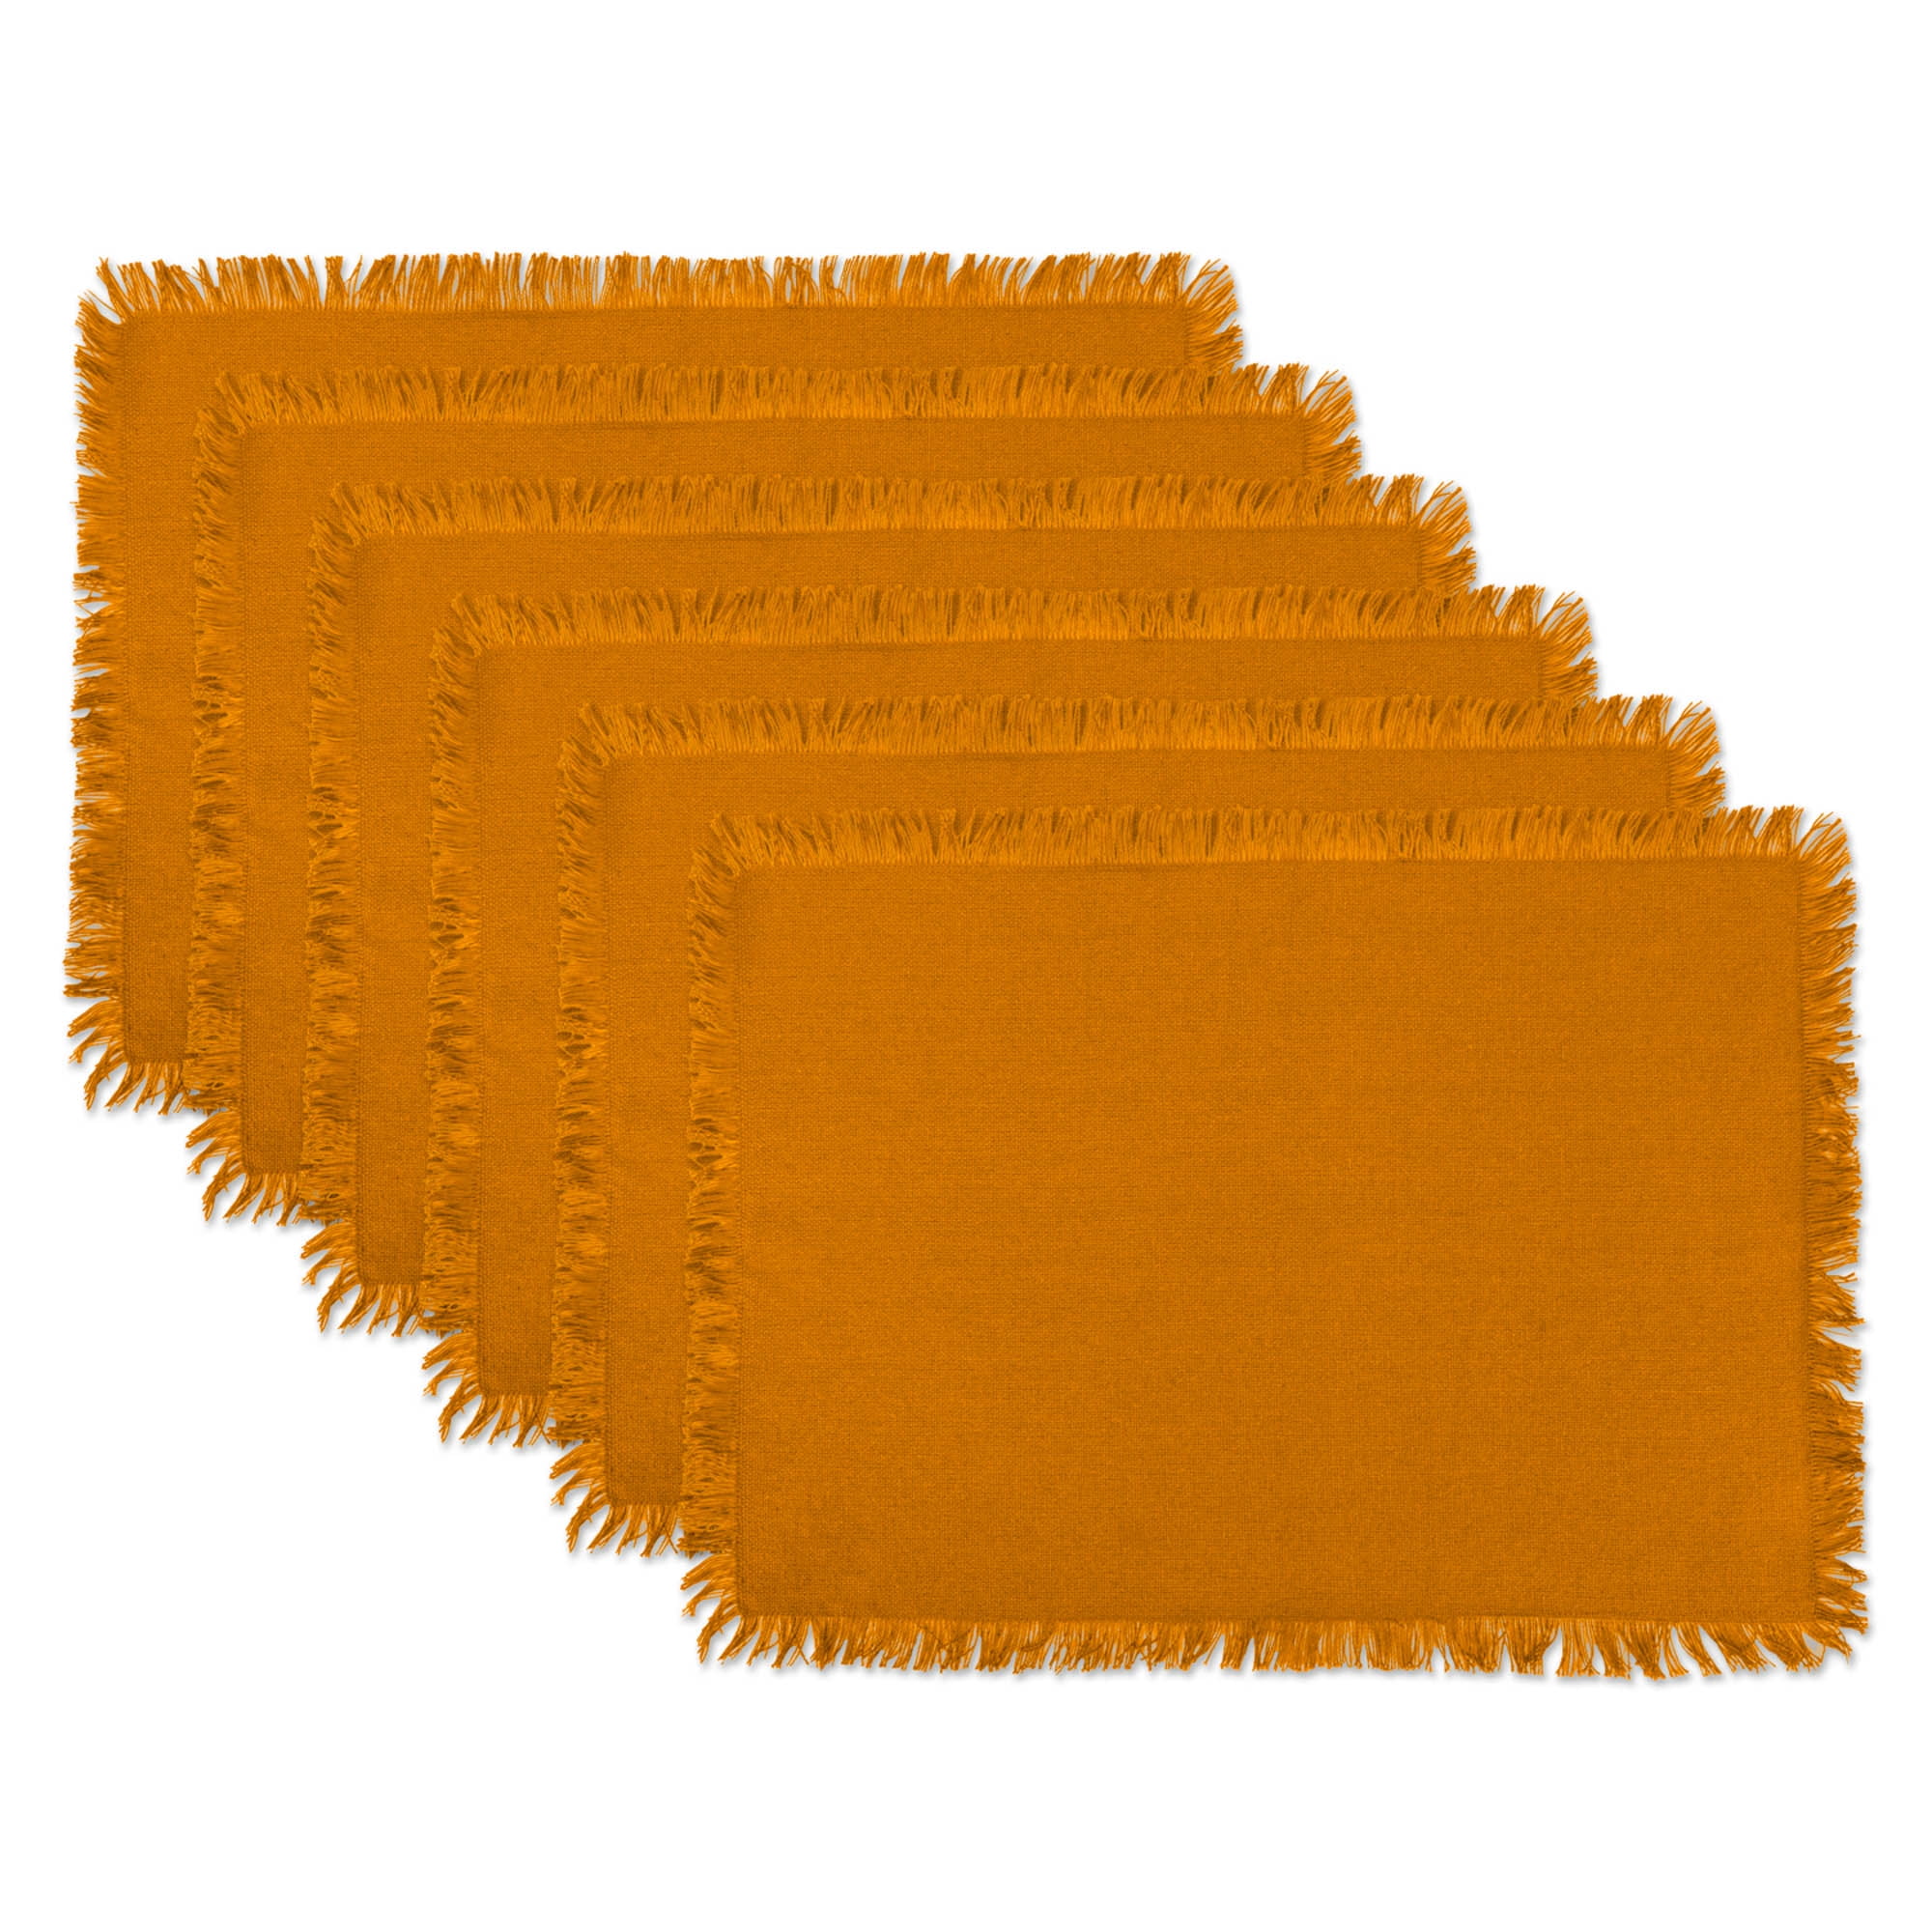 Picture of Design Imports CAMZ37576 13 x 19 in. Solid Pumpkin Spice Heavyweight Fringed Placemat - Set of 6